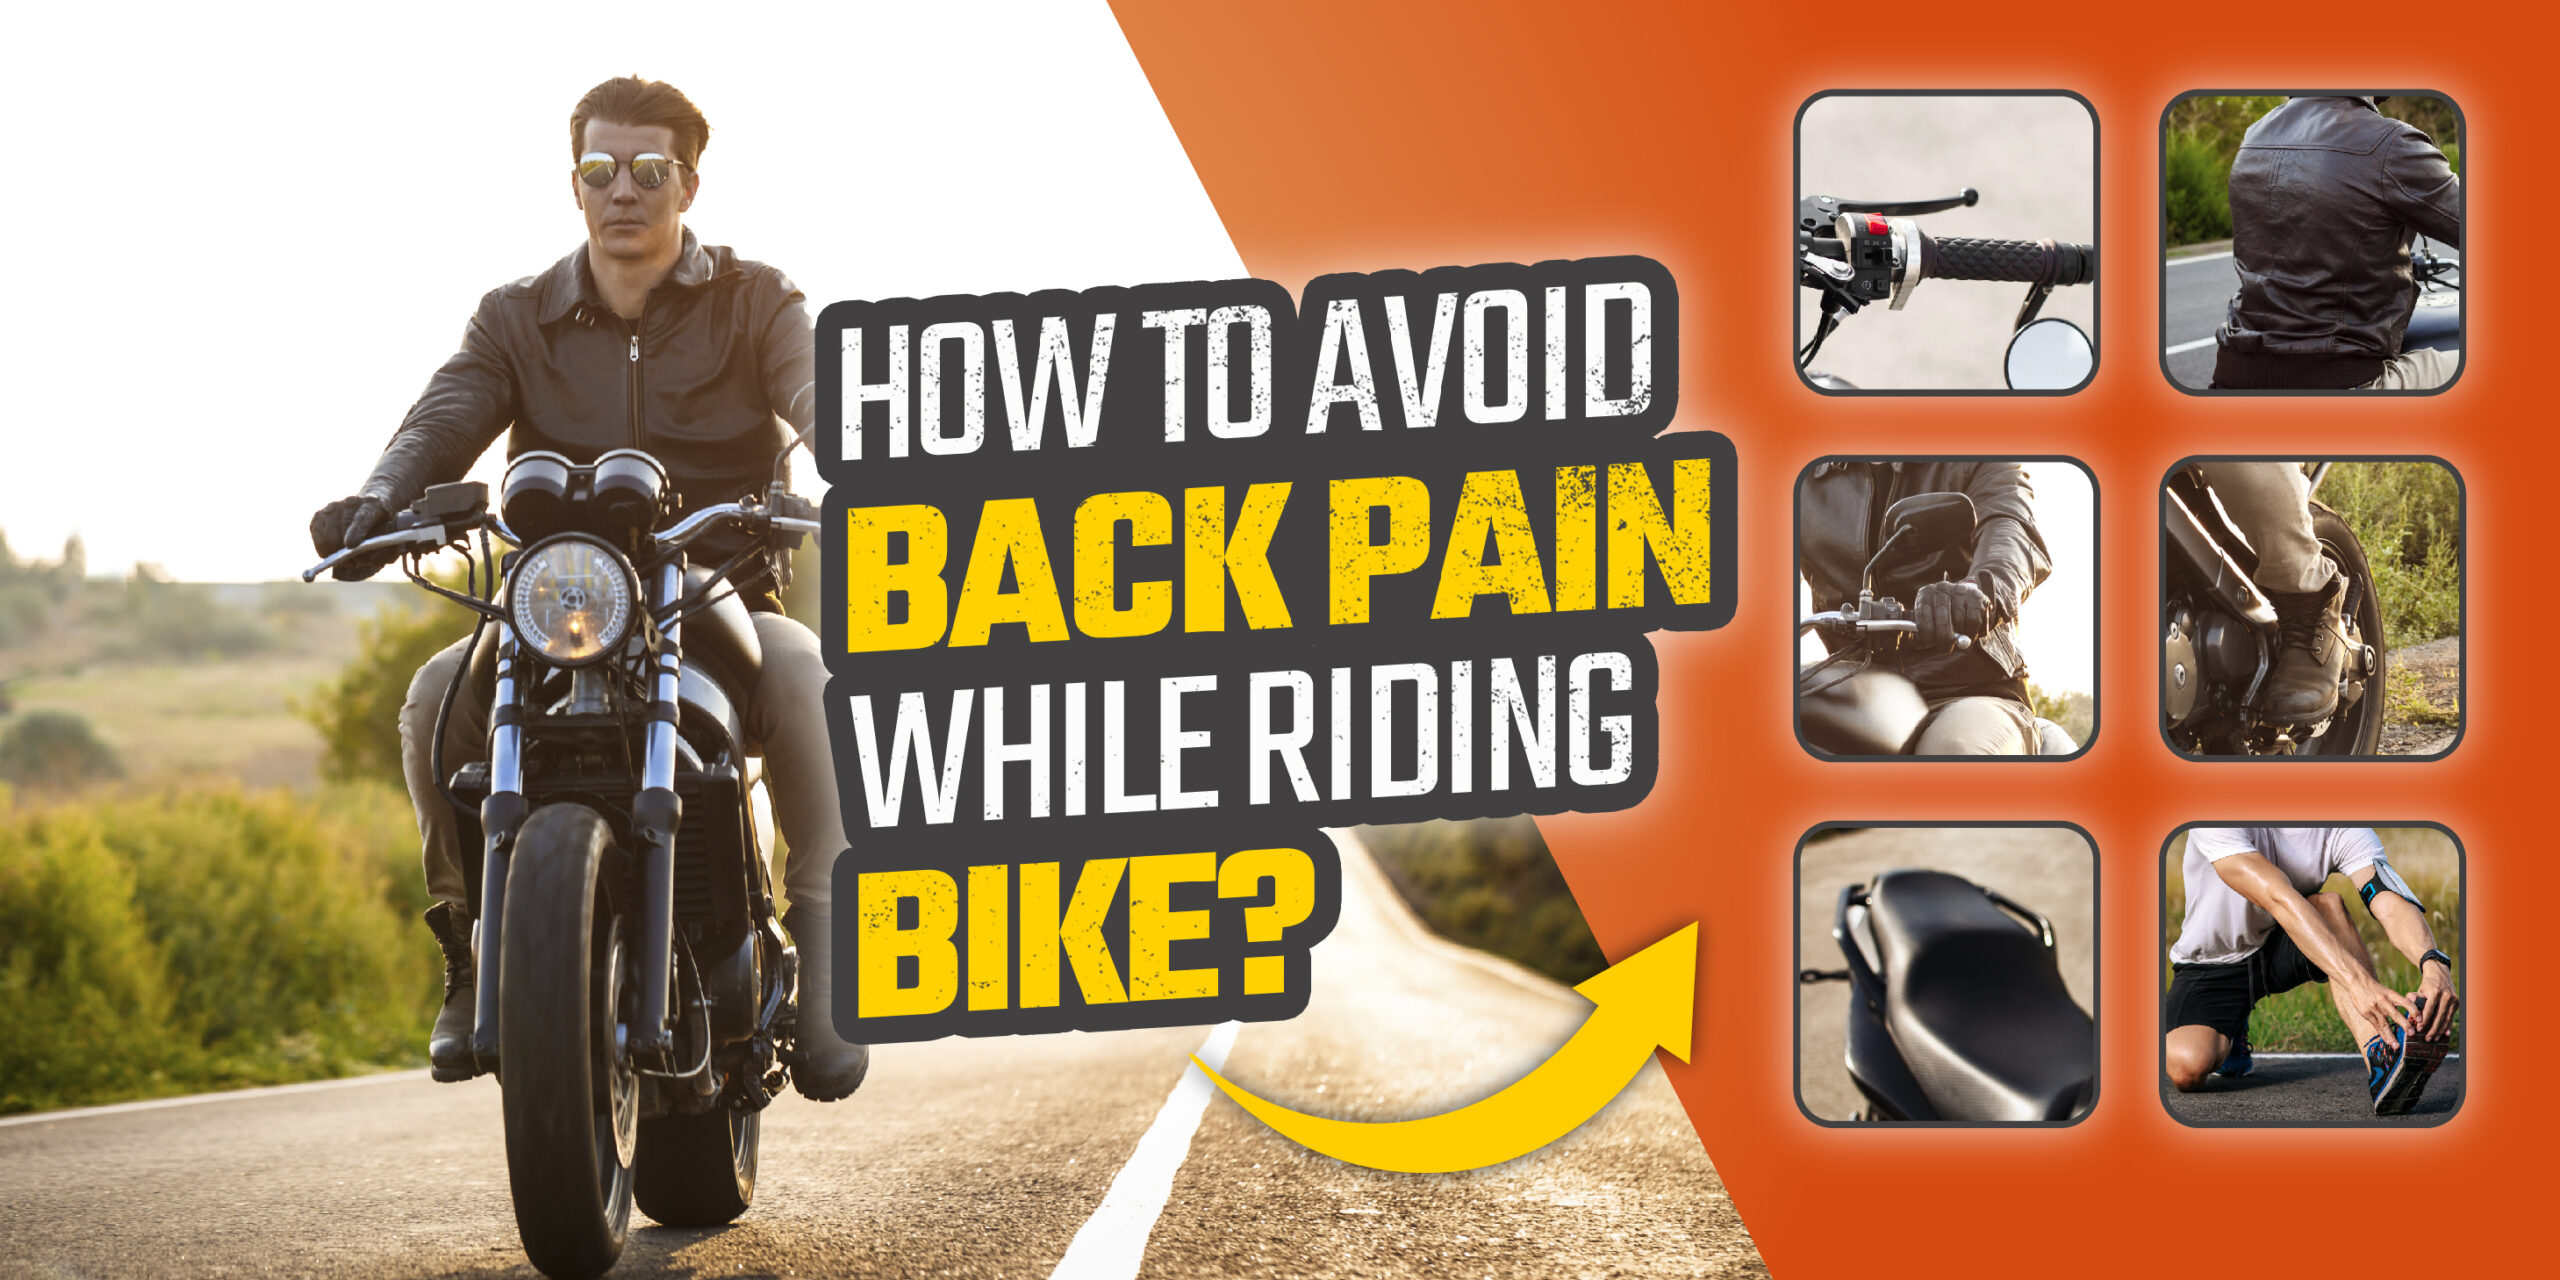 How To Avoid Back Pain While Riding Bike